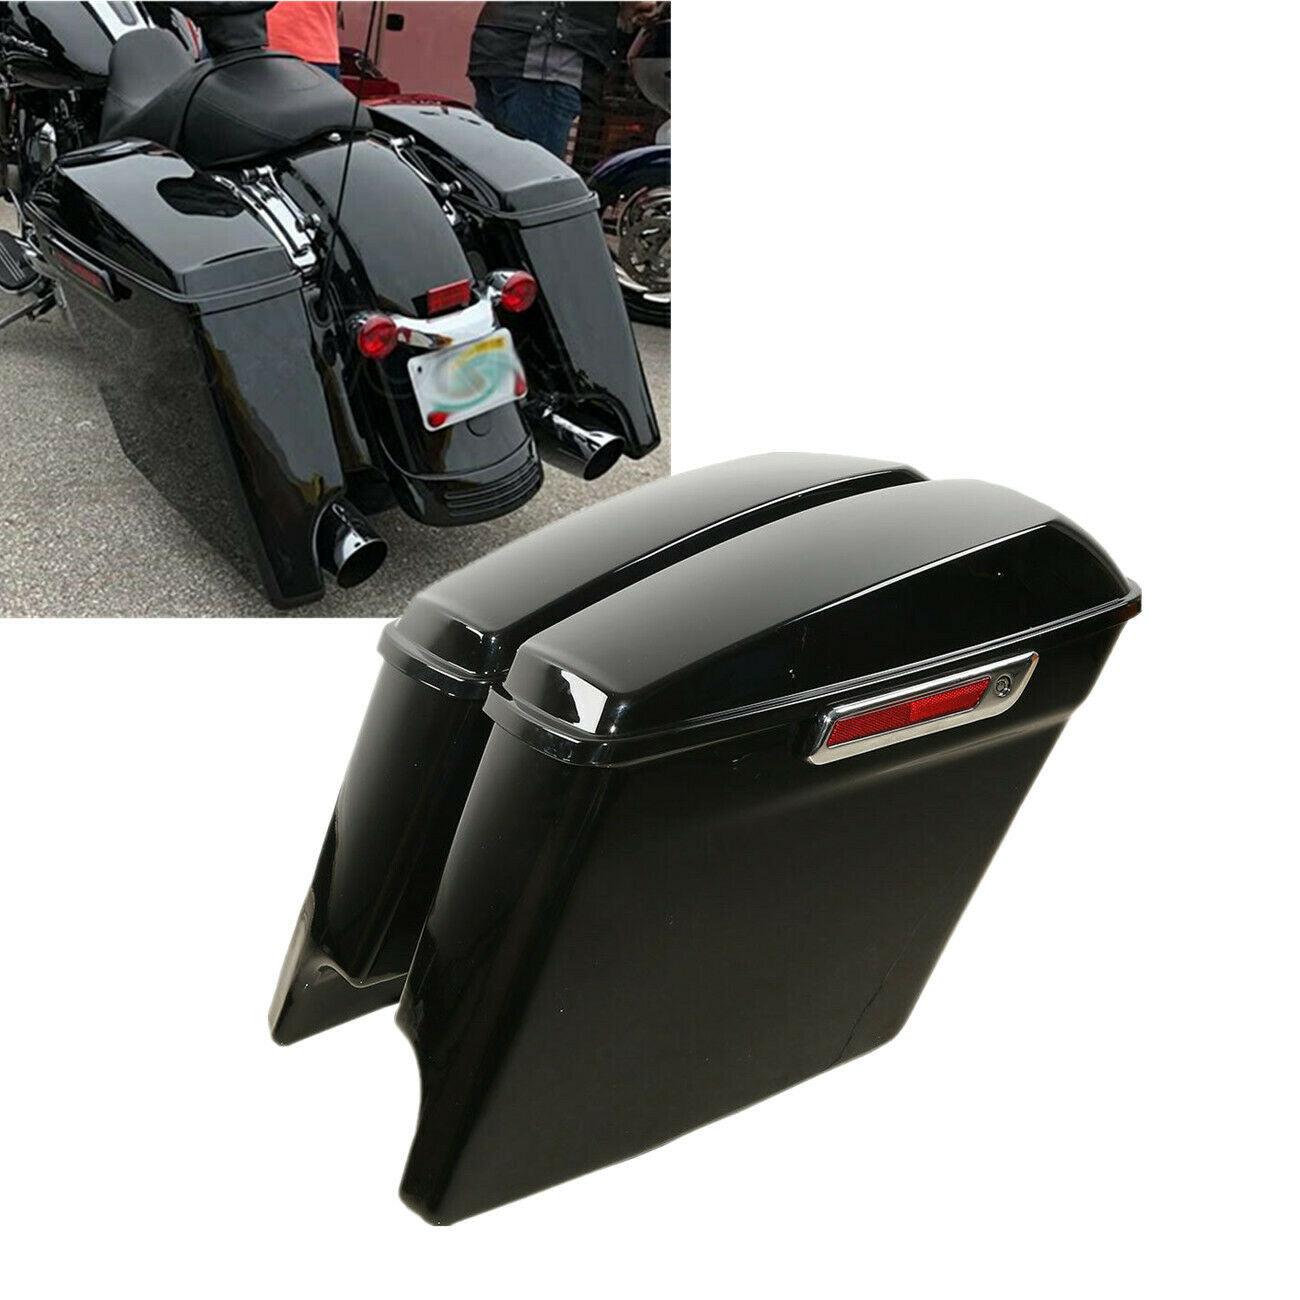 5" Stretched Hard Bags Saddlebag Fit For Harley Touring Electra Glide 1993-2013 - Moto Life Products